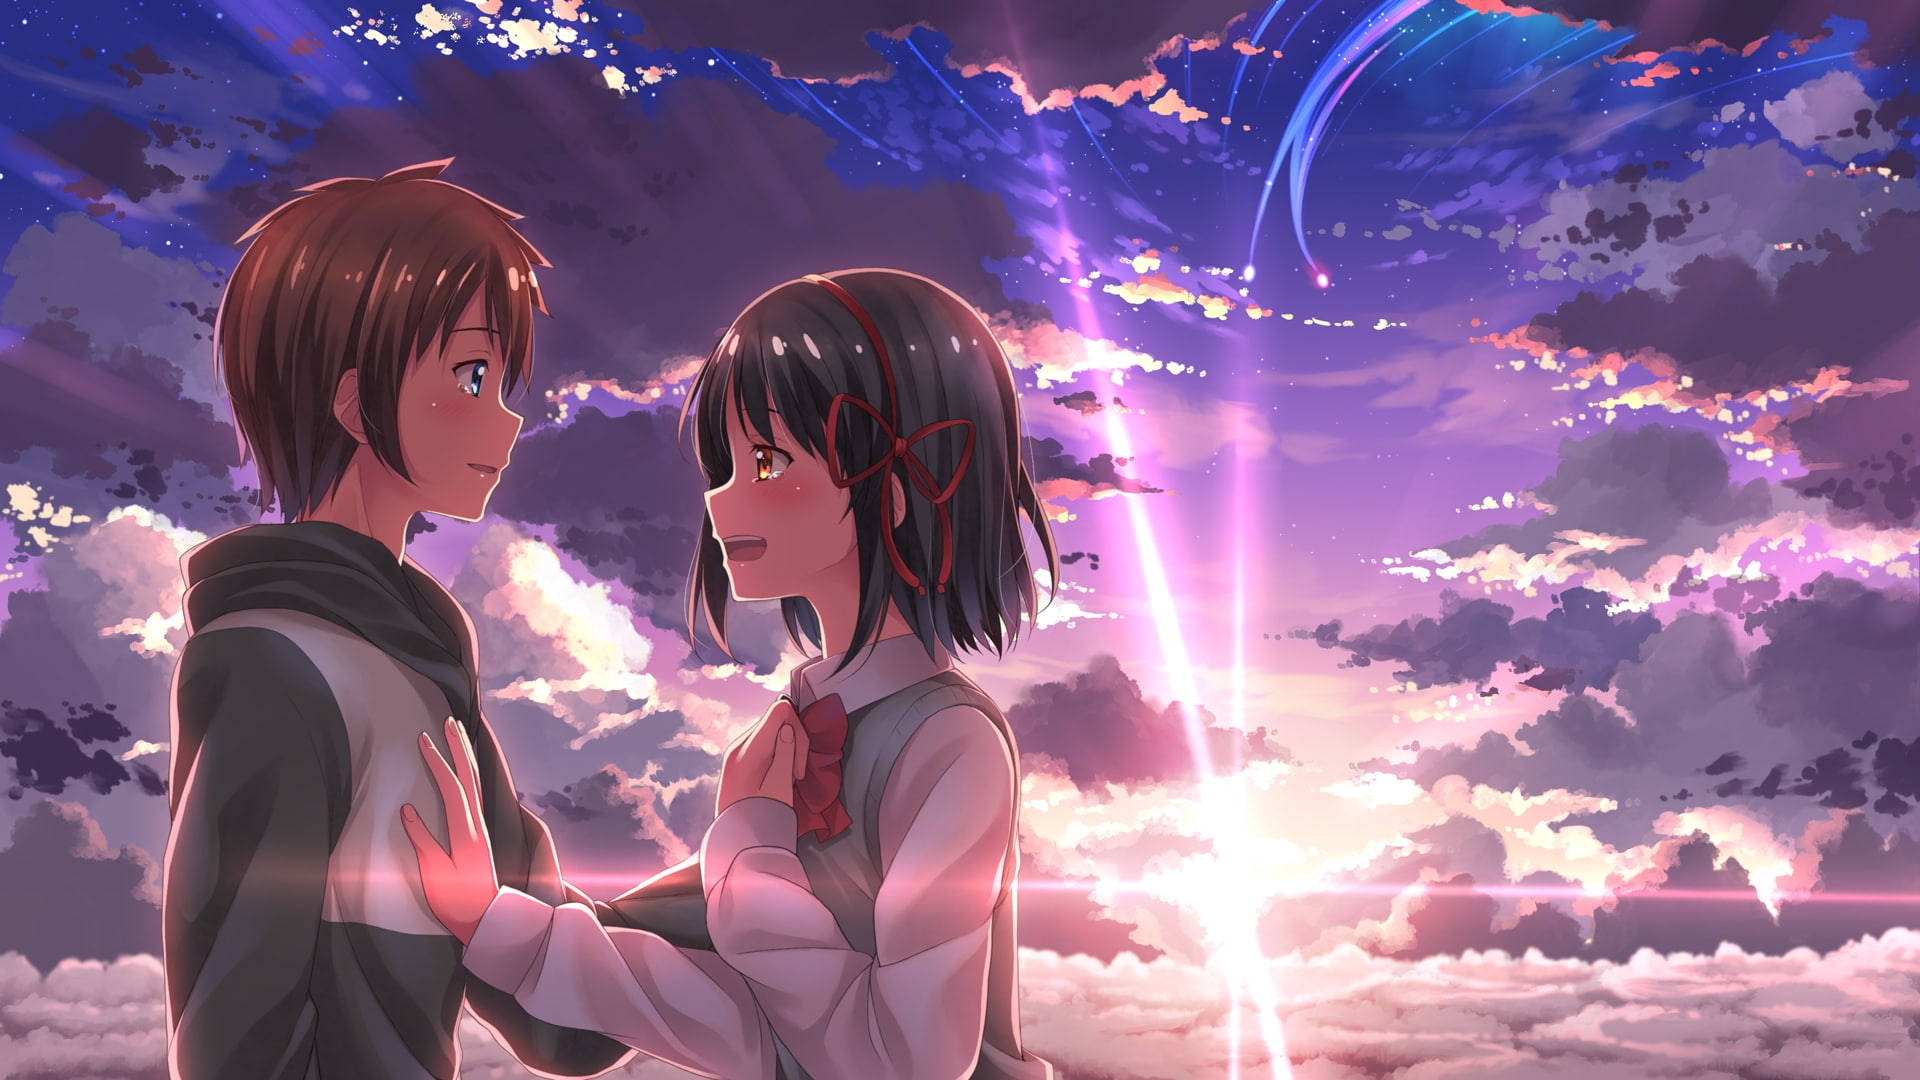 Cute Anime Couple And Cloudy Sunset